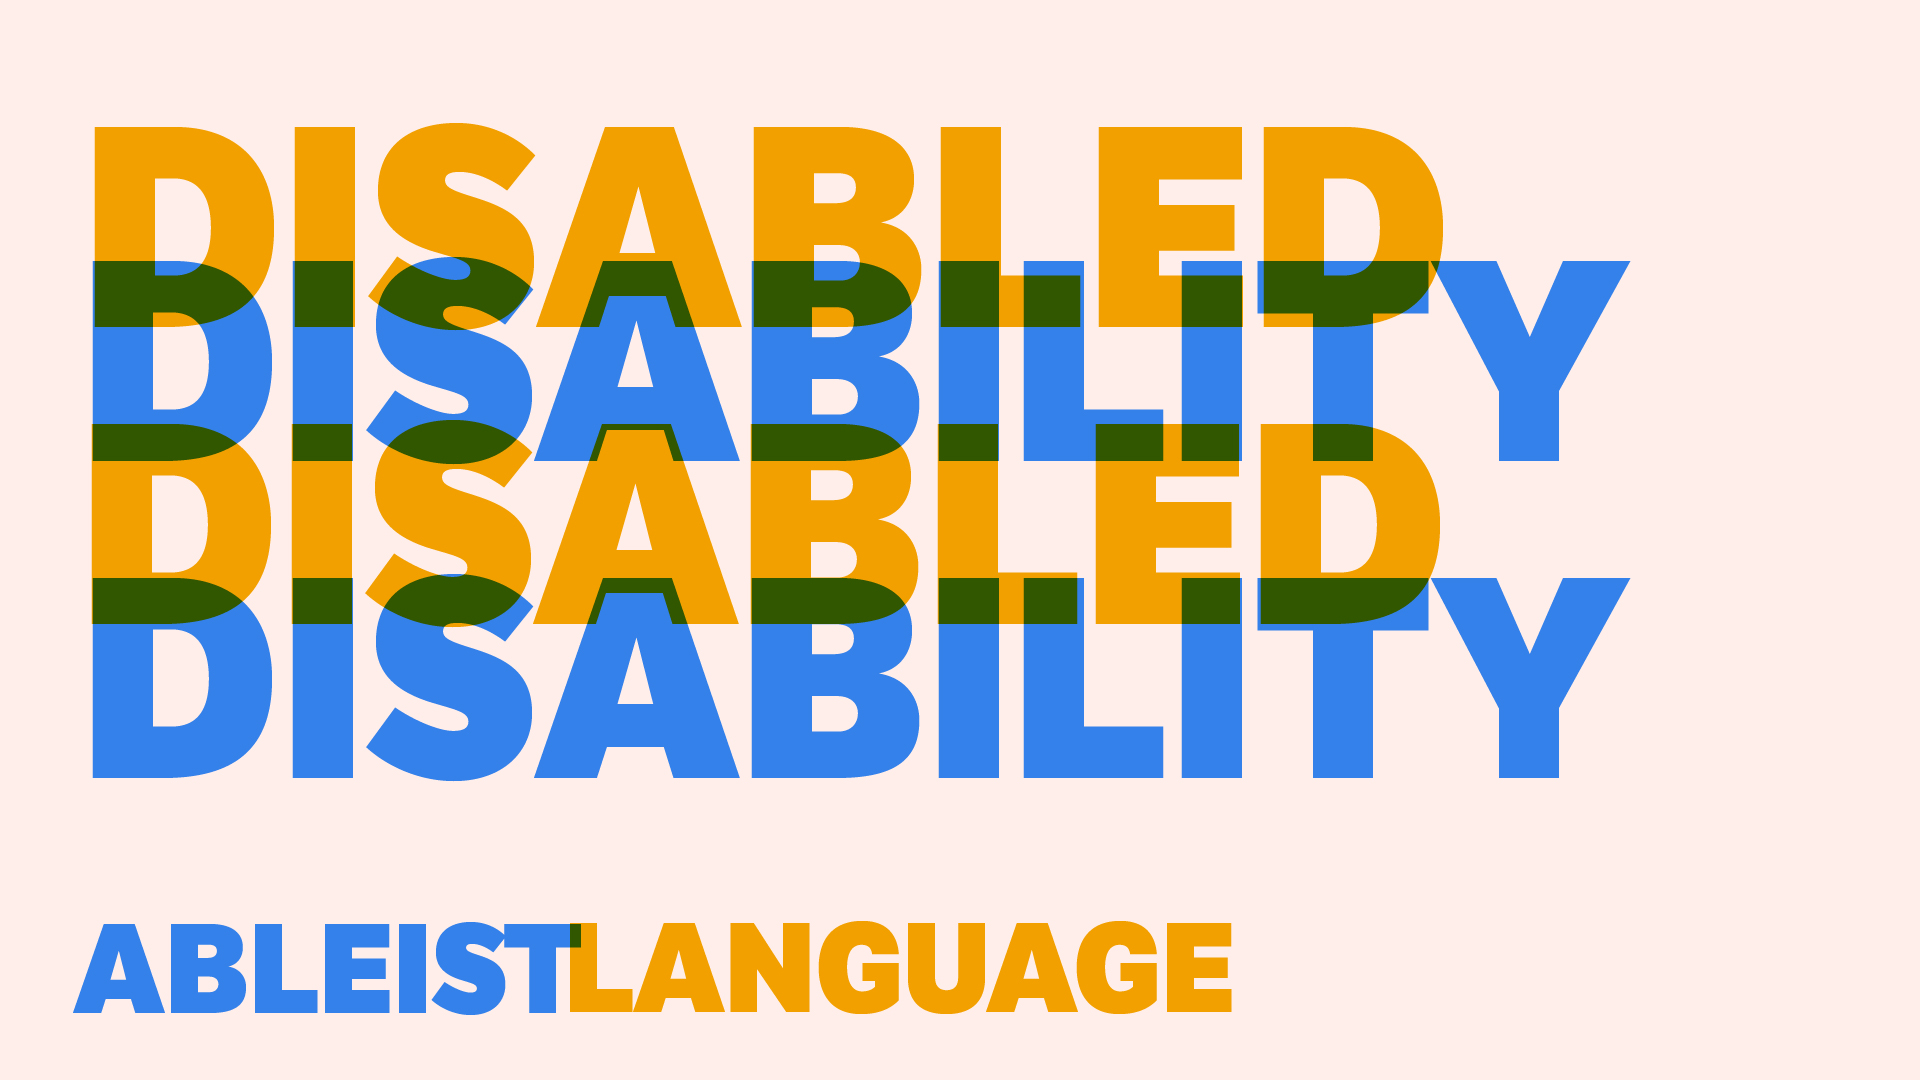 Ableist Language You May Not Realize You’re Using